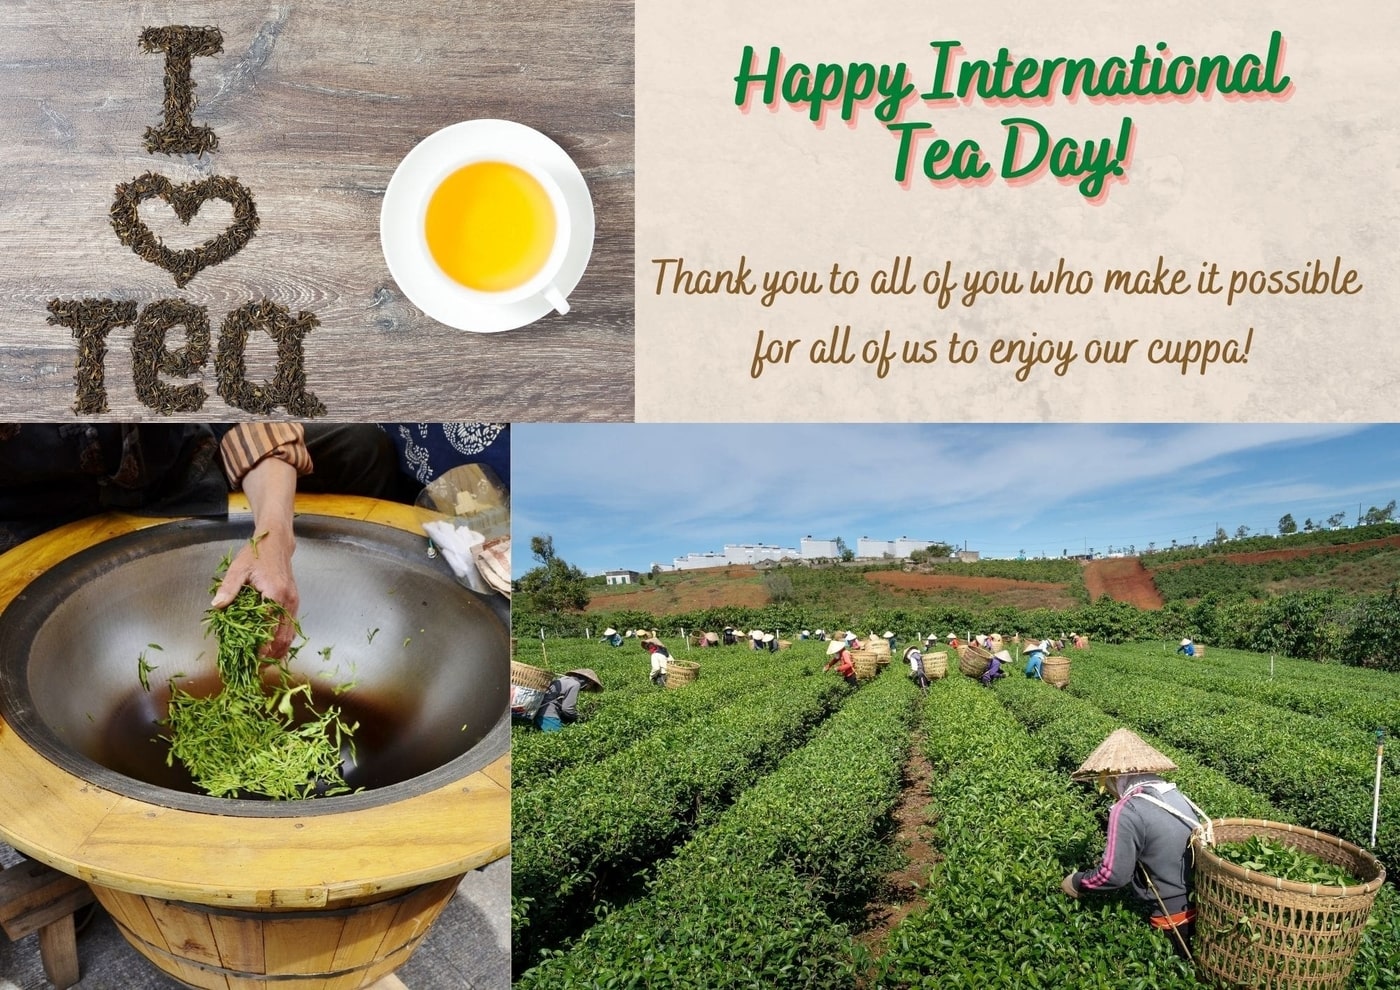 International Tea Day is celebrated every 21 May